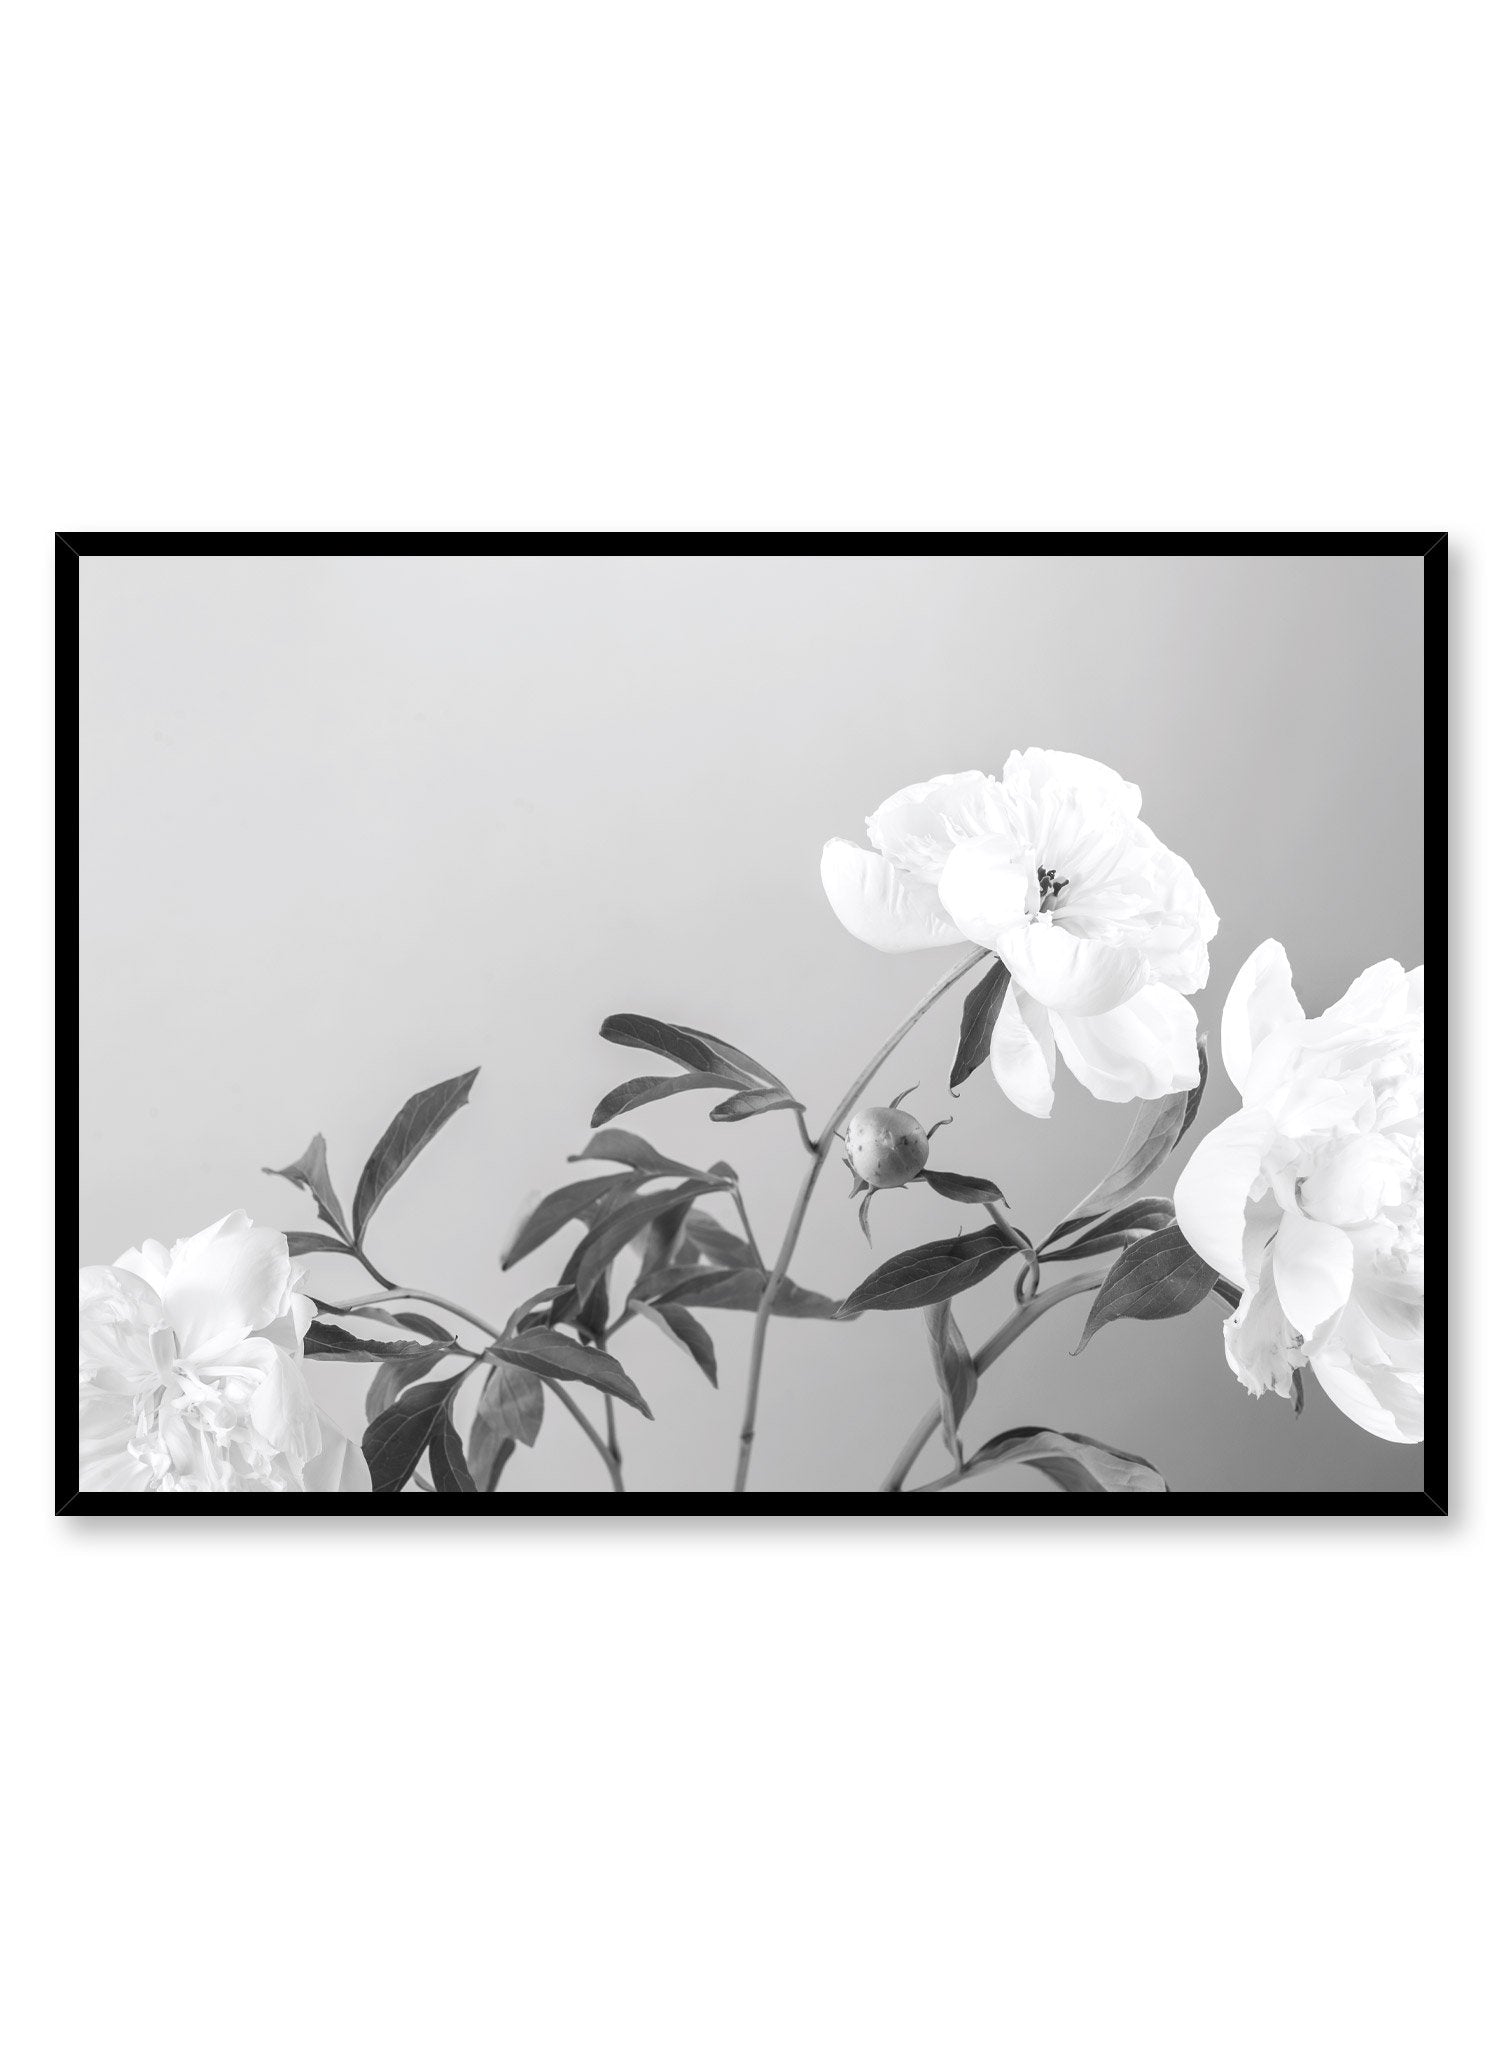 Modern minimalist poster by Opposite Wall with Sweetness peony still life black and white photography